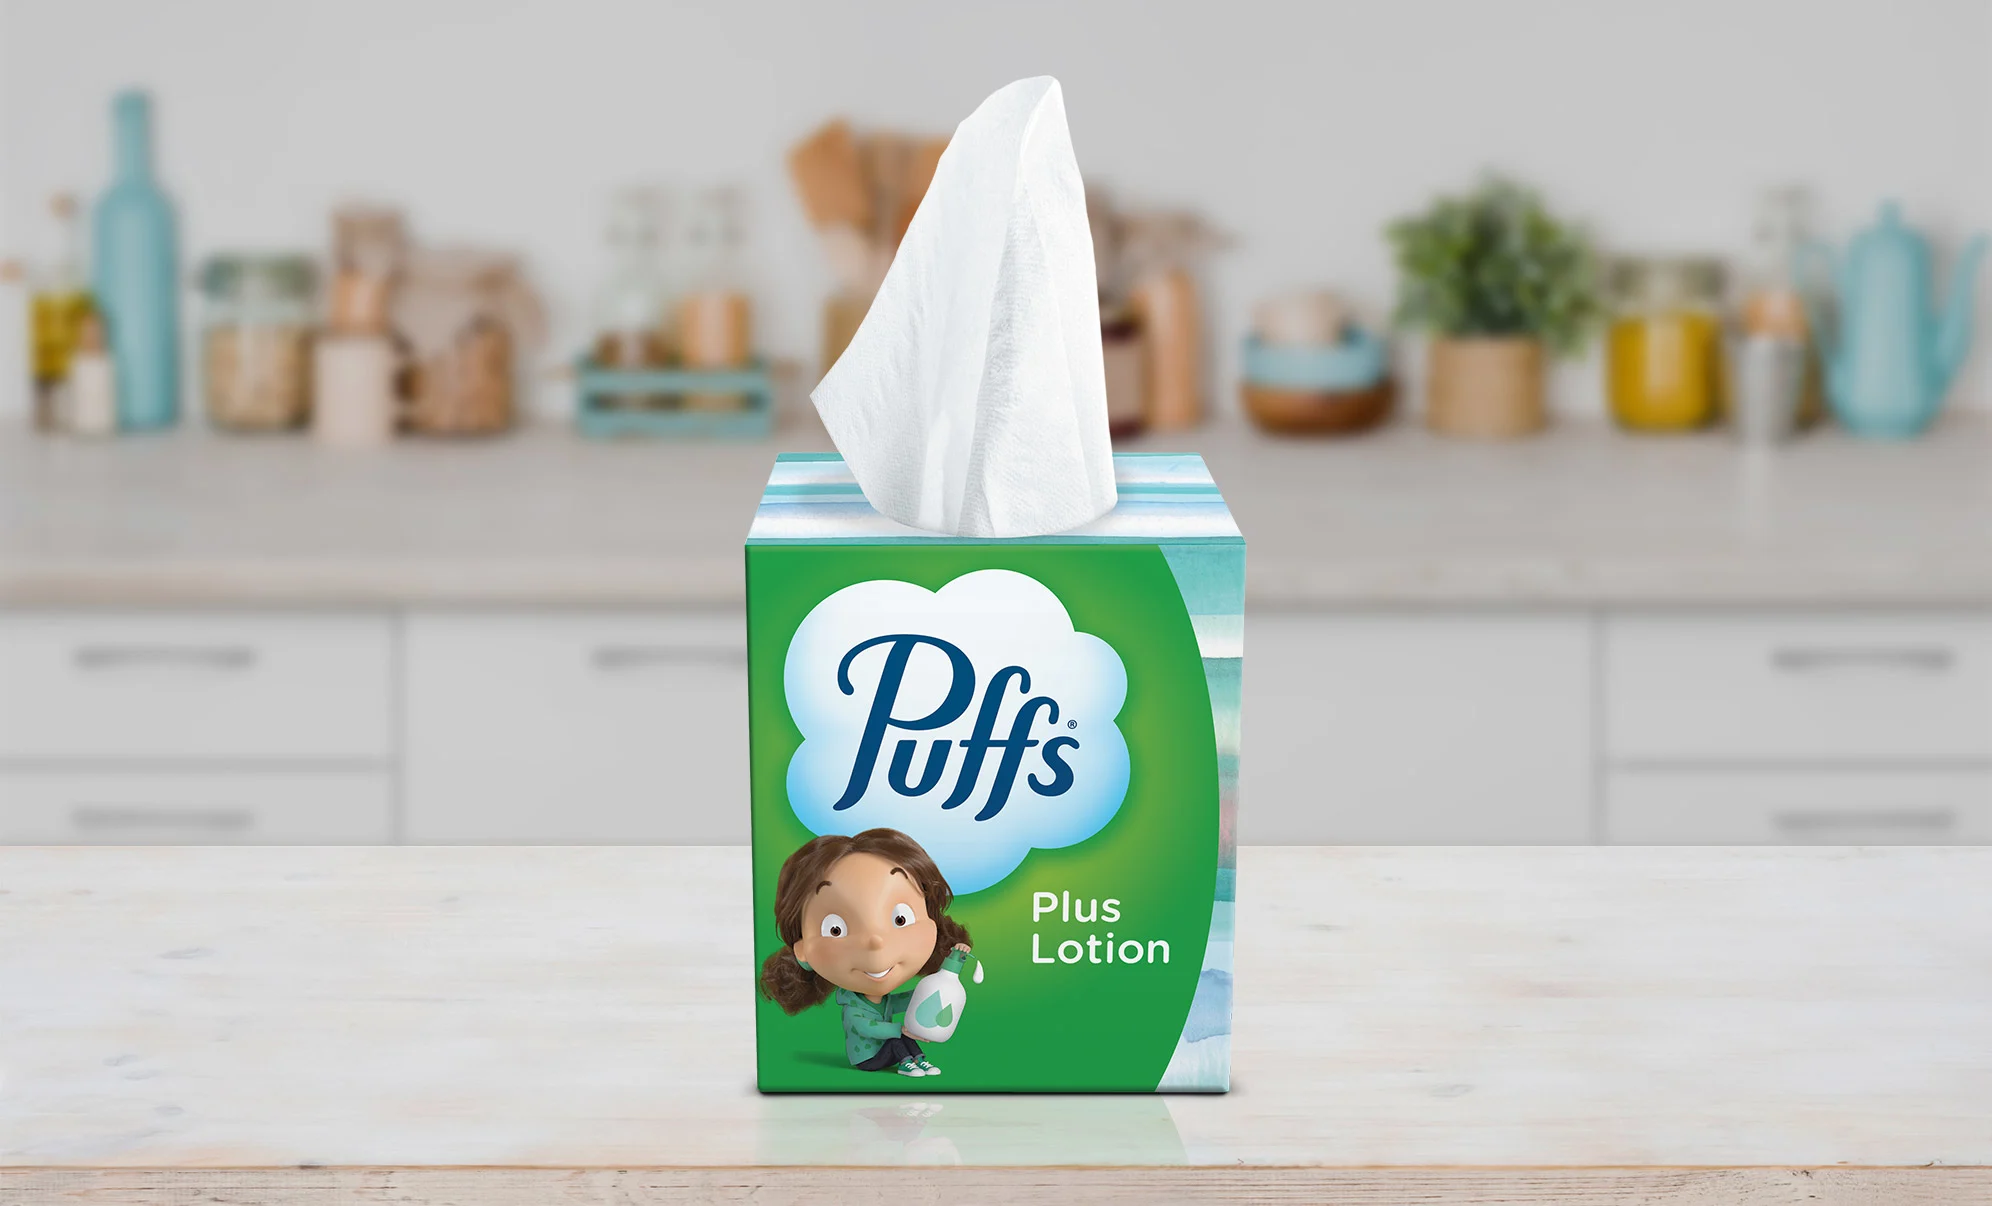 Girl sitting at the table with Puffs Plus Lotion